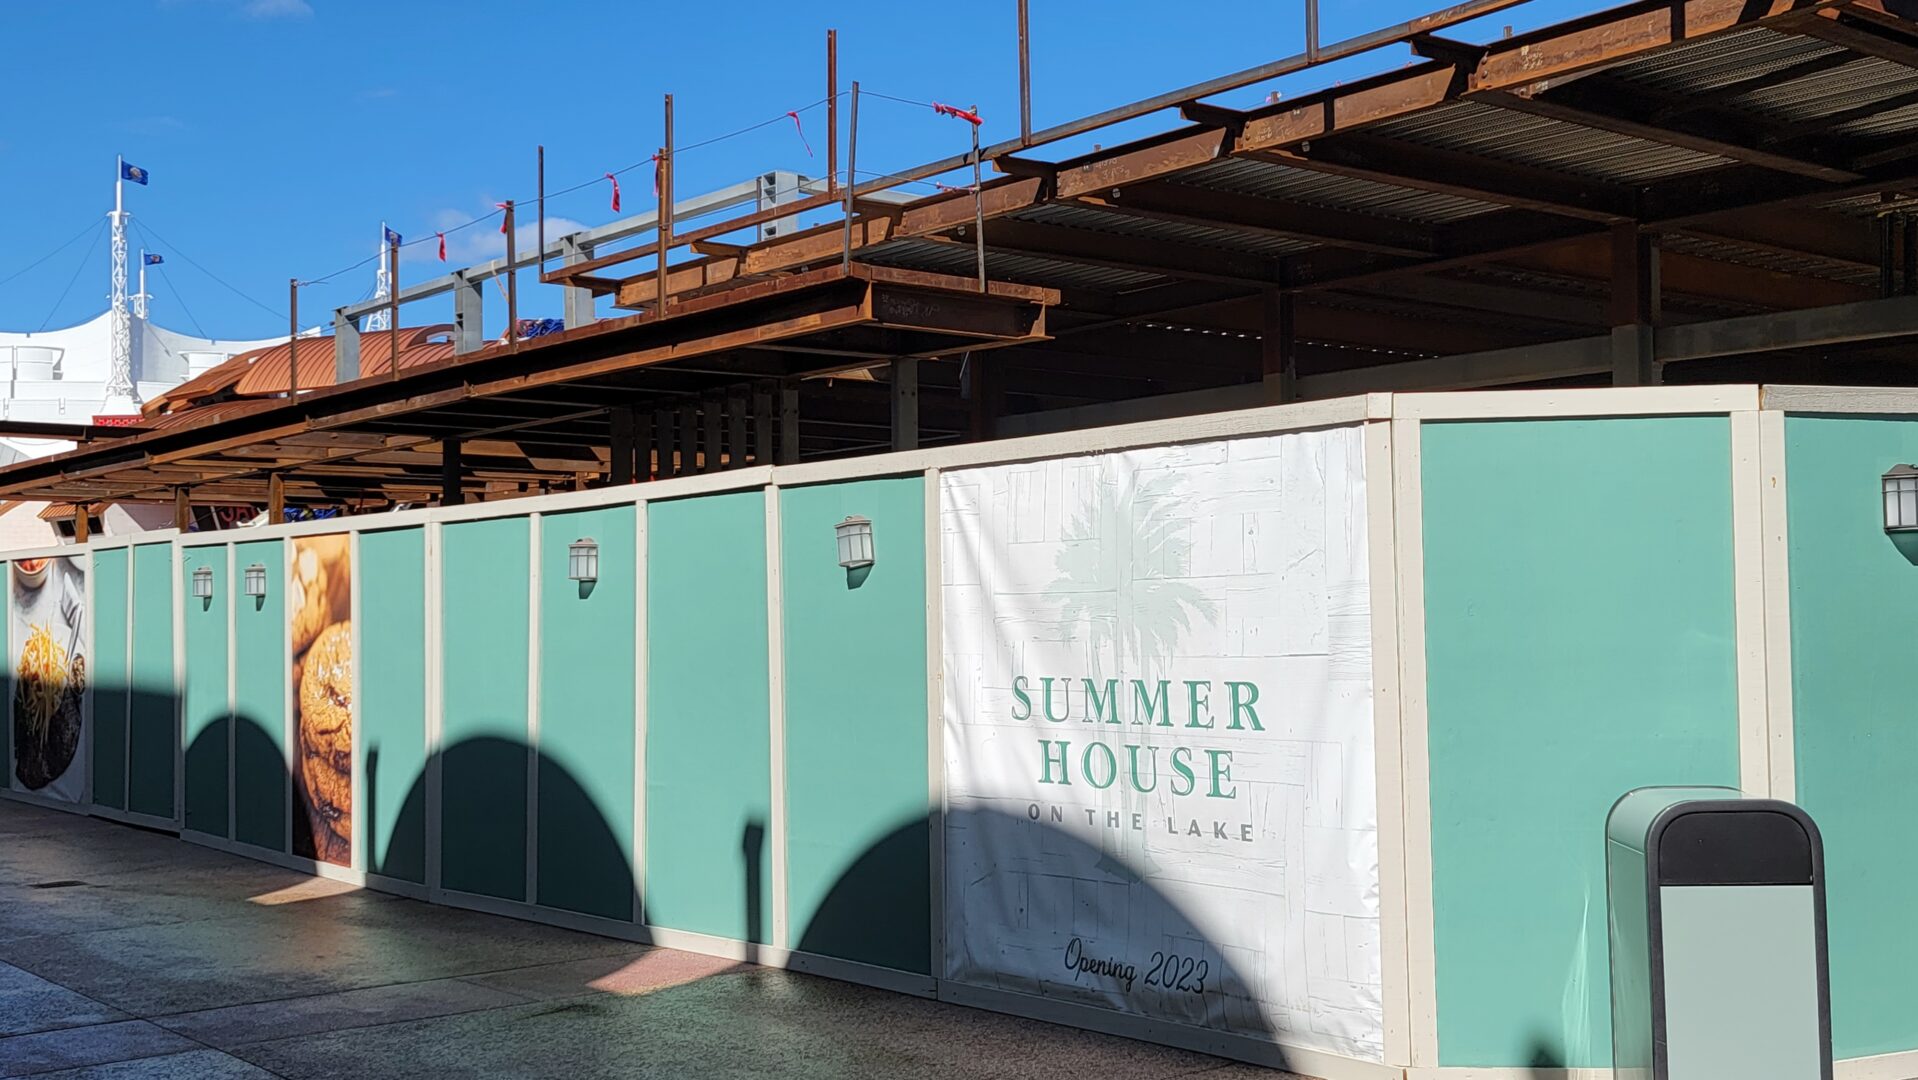 Summer House on the Lake Construction Update from Disney Springs